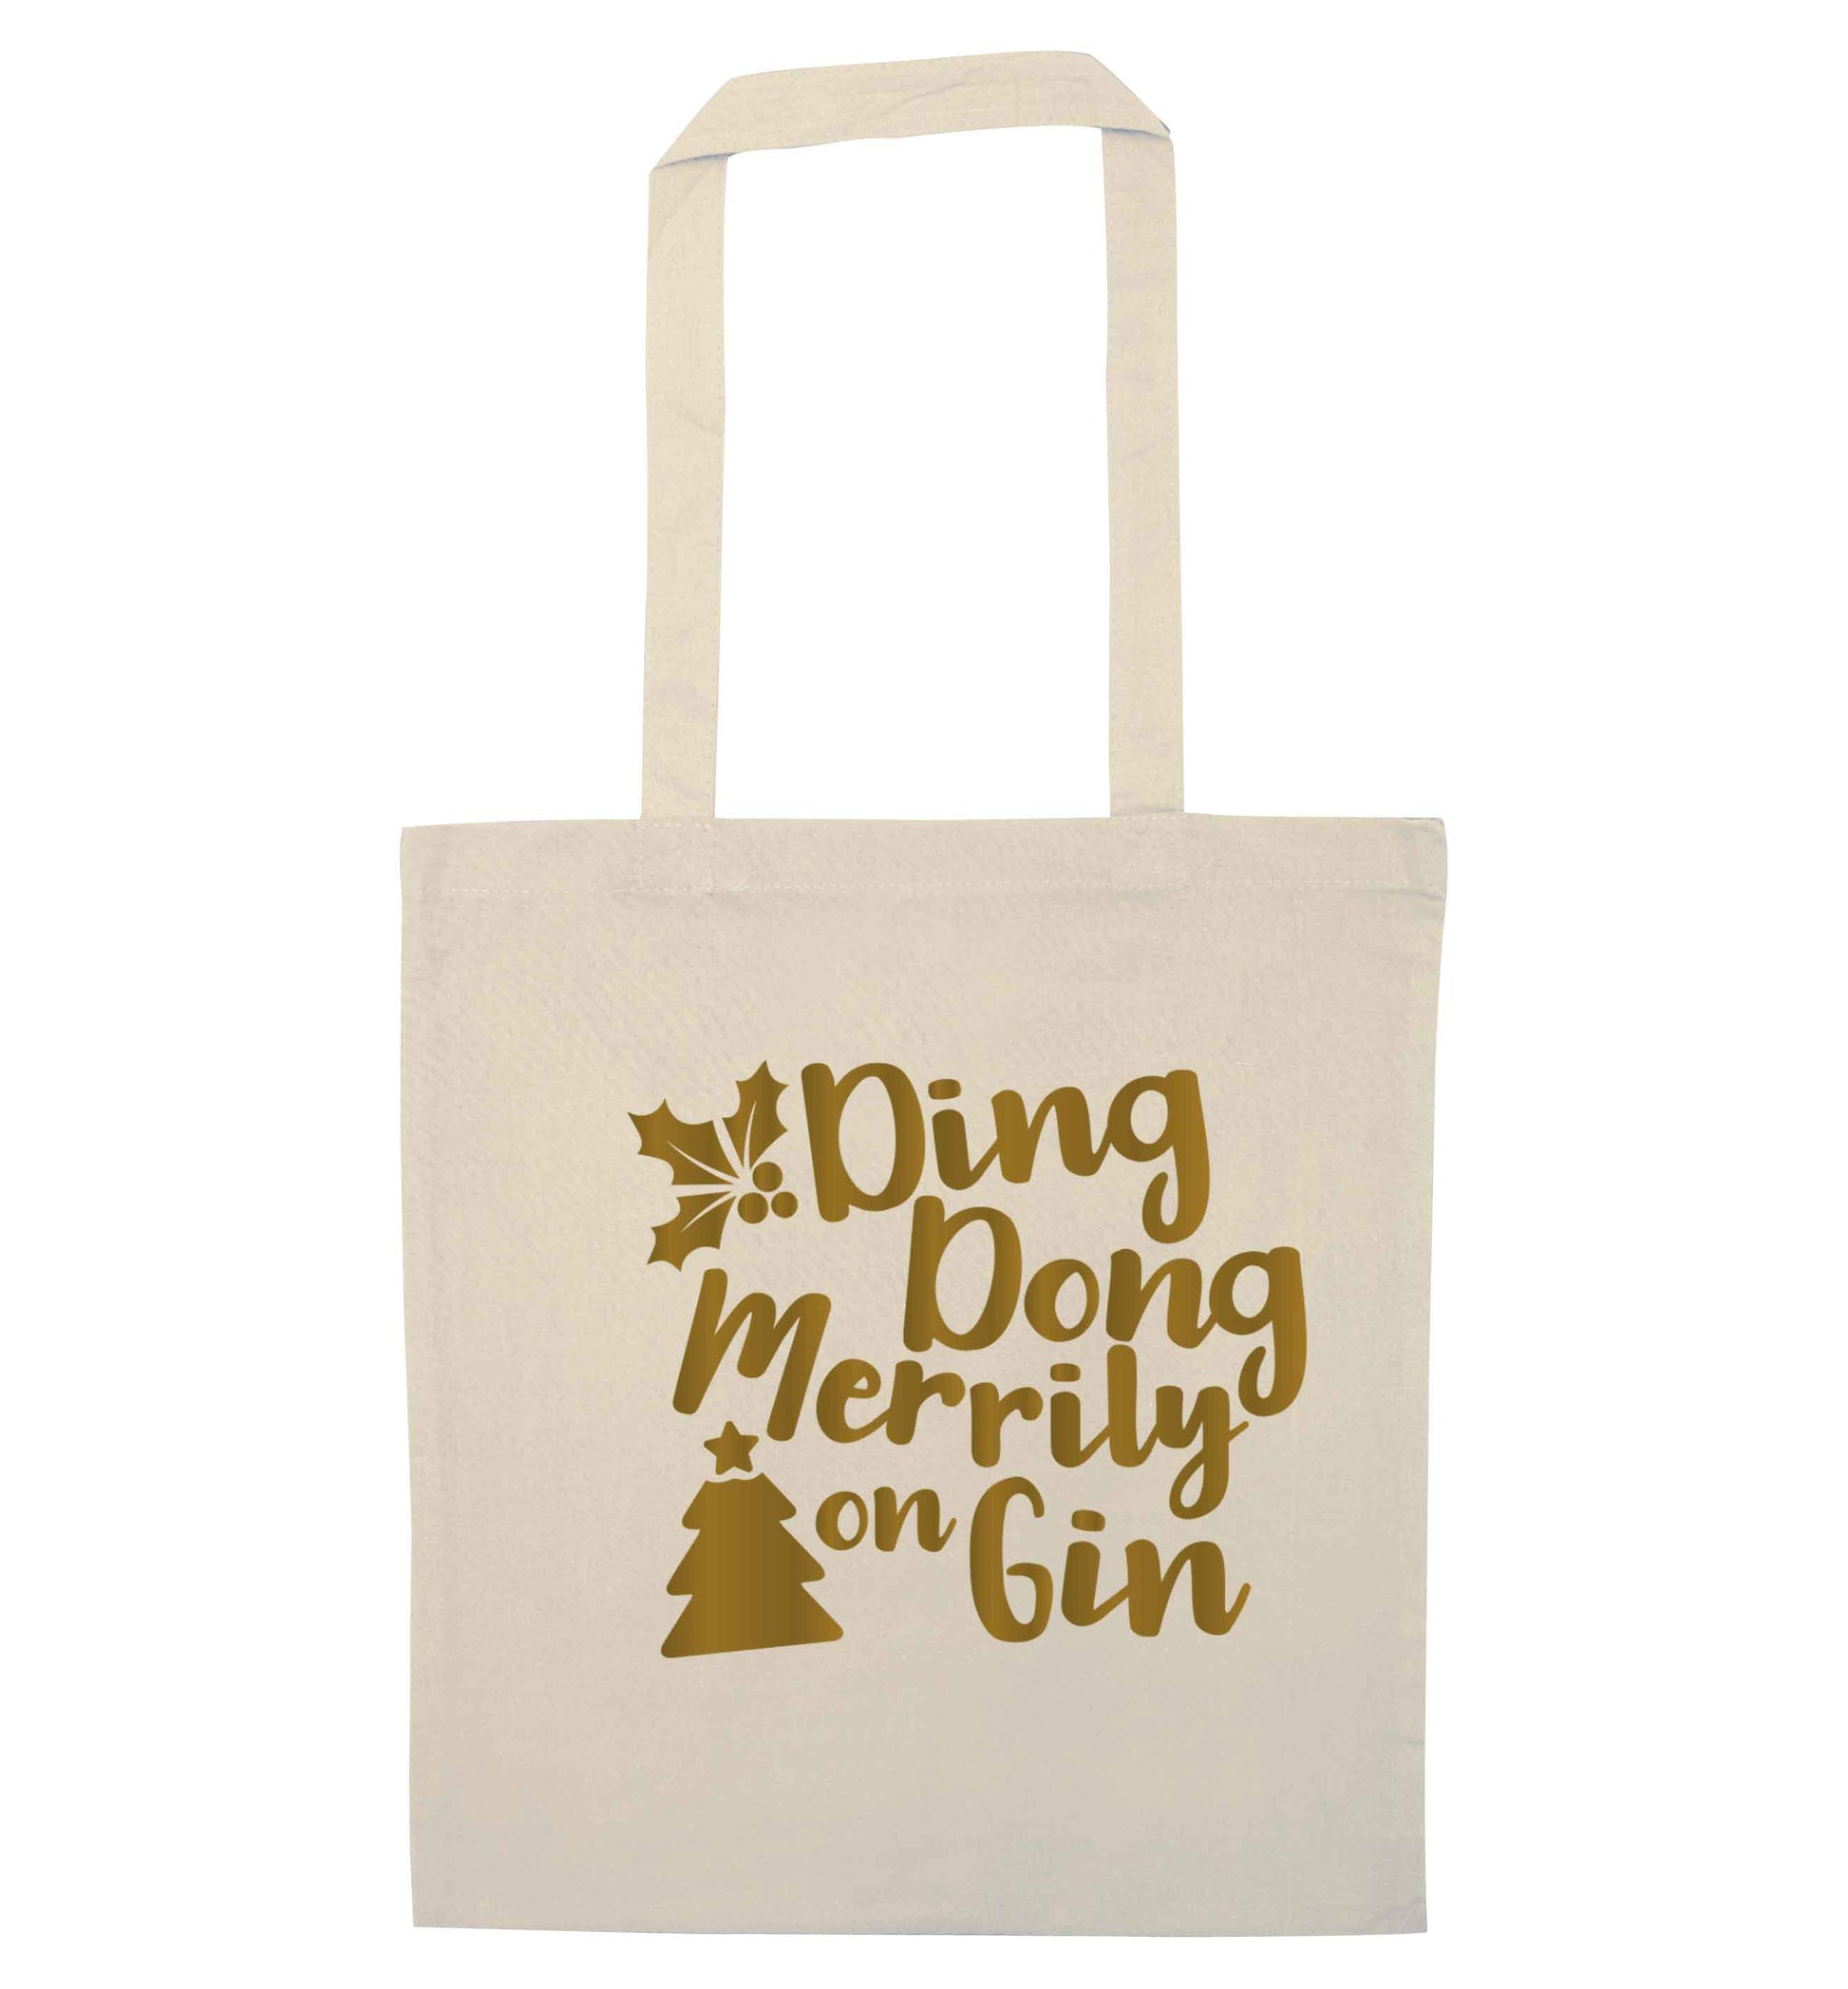 Ding dong merrily on gin natural tote bag